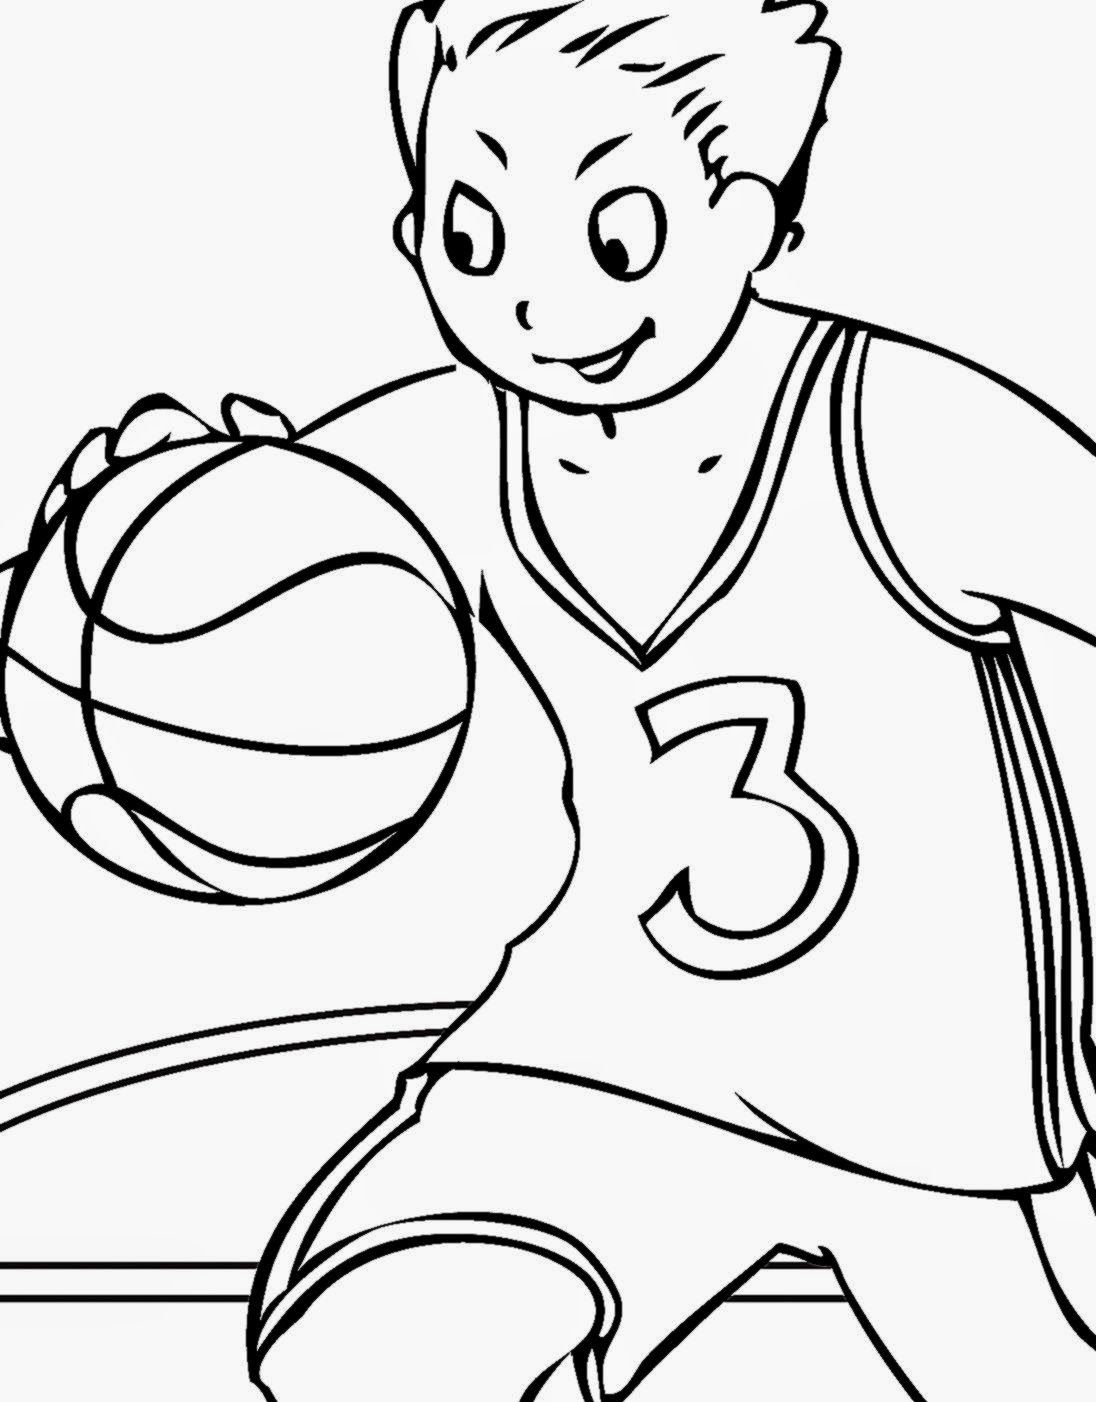 basketball coloring pages basketball coloring pages printable coloring home coloring basketball pages 1 1